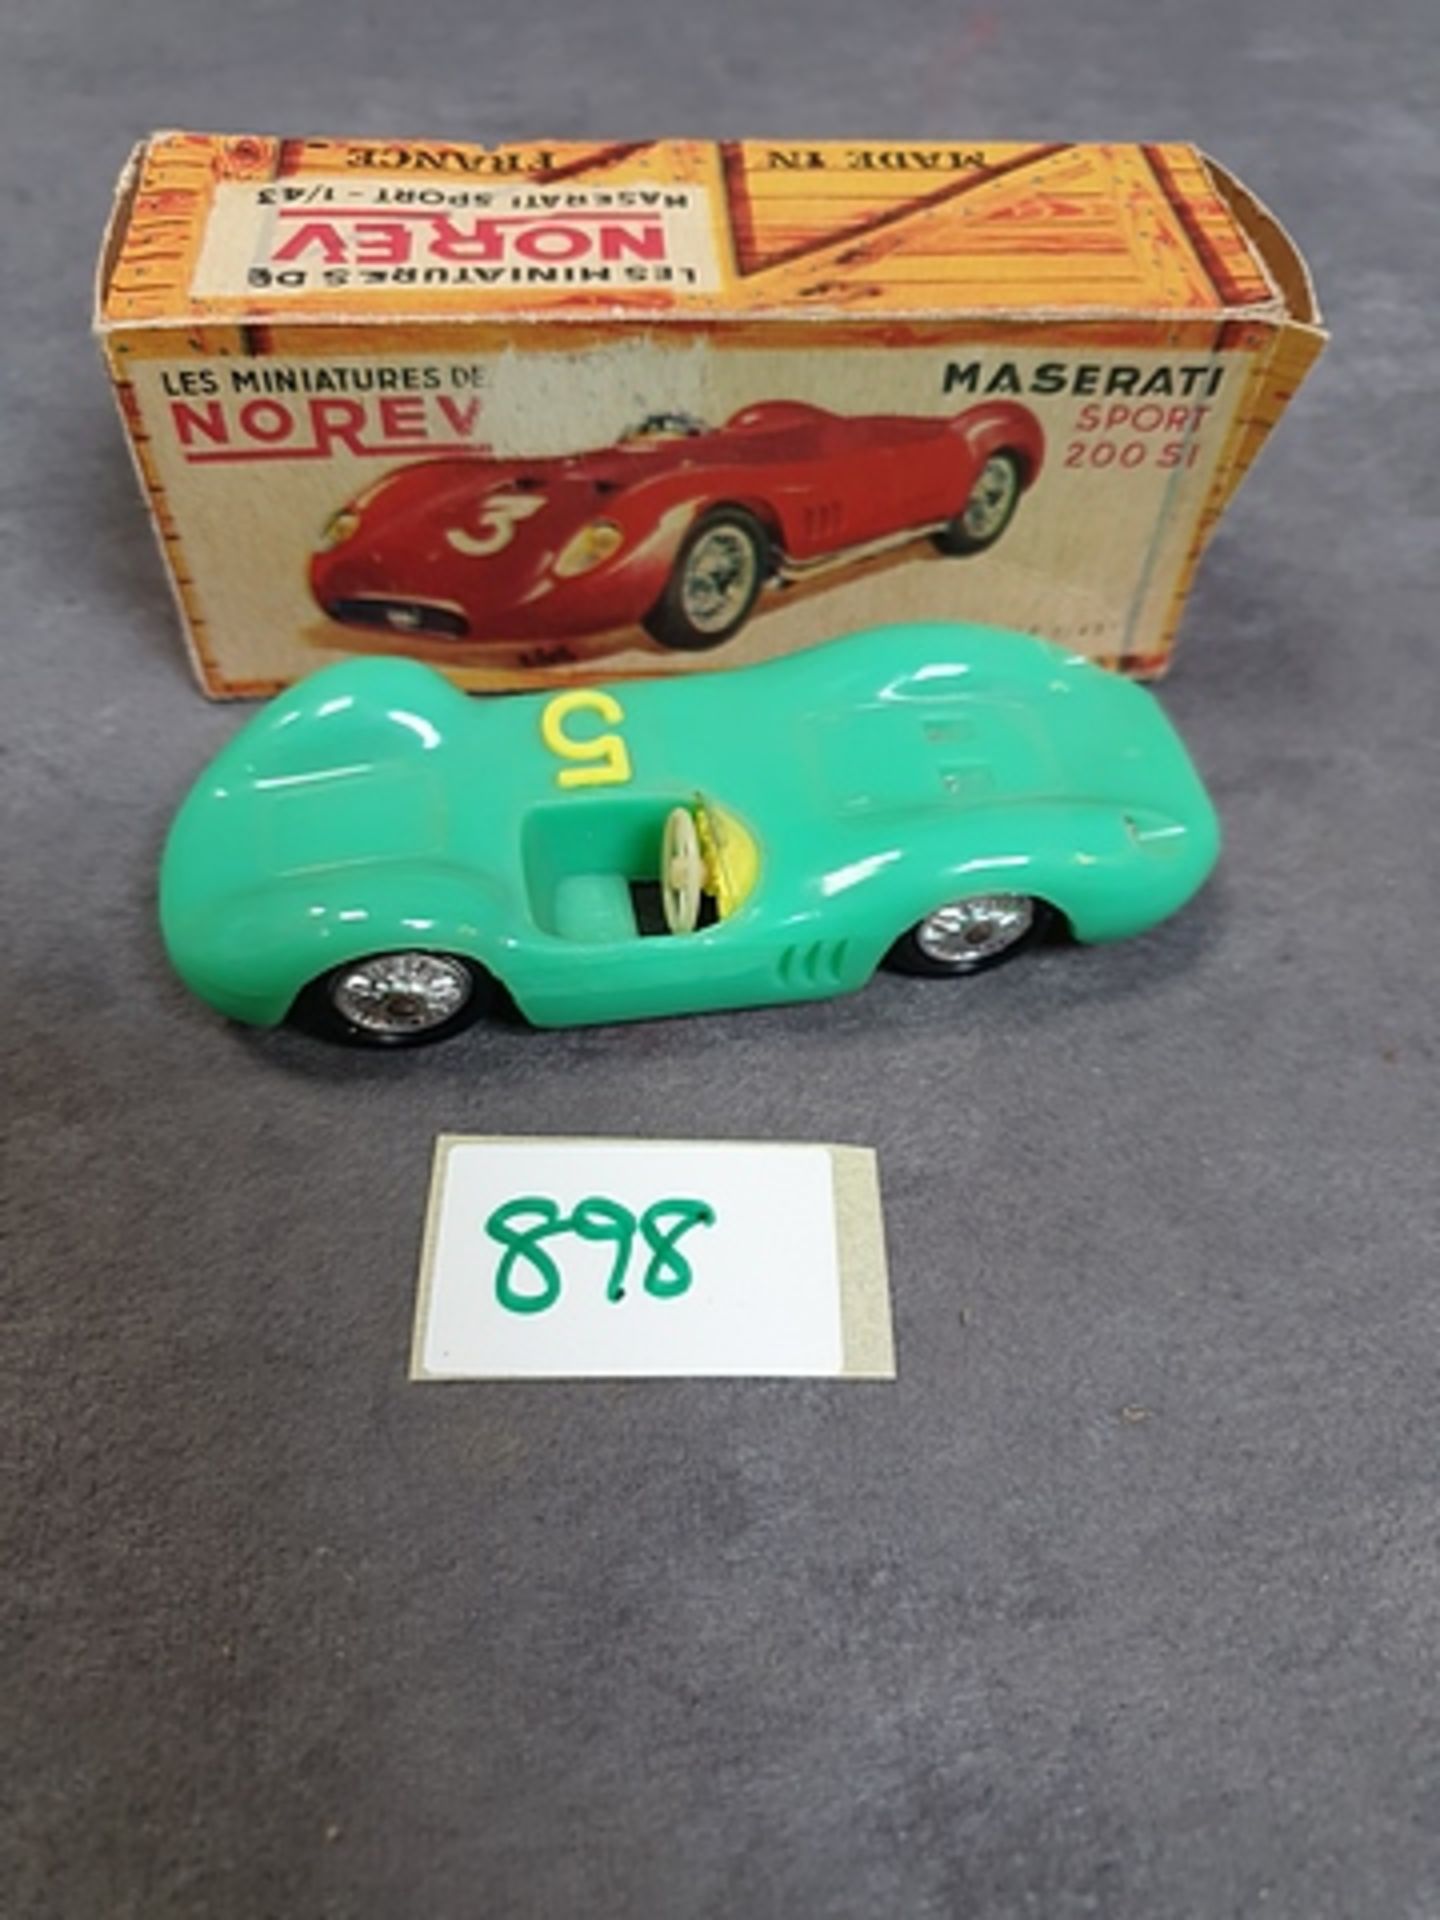 Norev (France) #12 Maserati Sport 200SI In Green With The Yellow Number 5 Scale 1/43 Plastic - Image 2 of 2